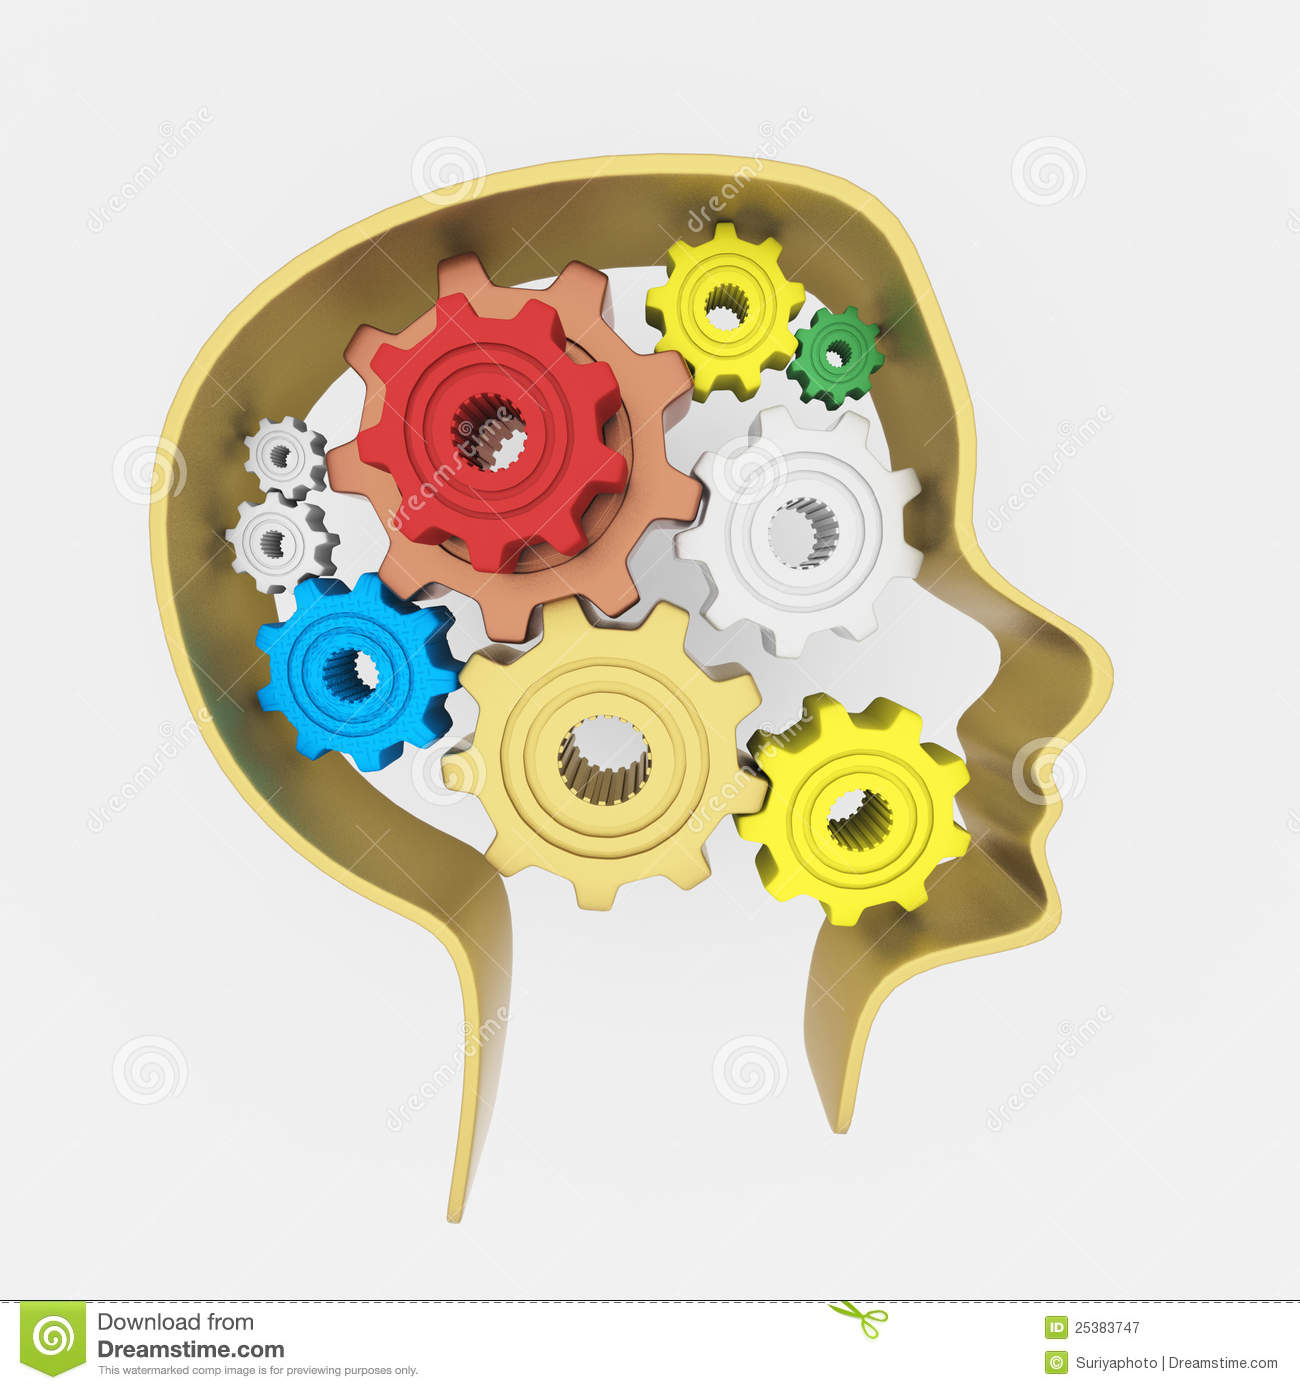 3d Brain Of Creative Thinking Royalty Free Stock Photography   Image